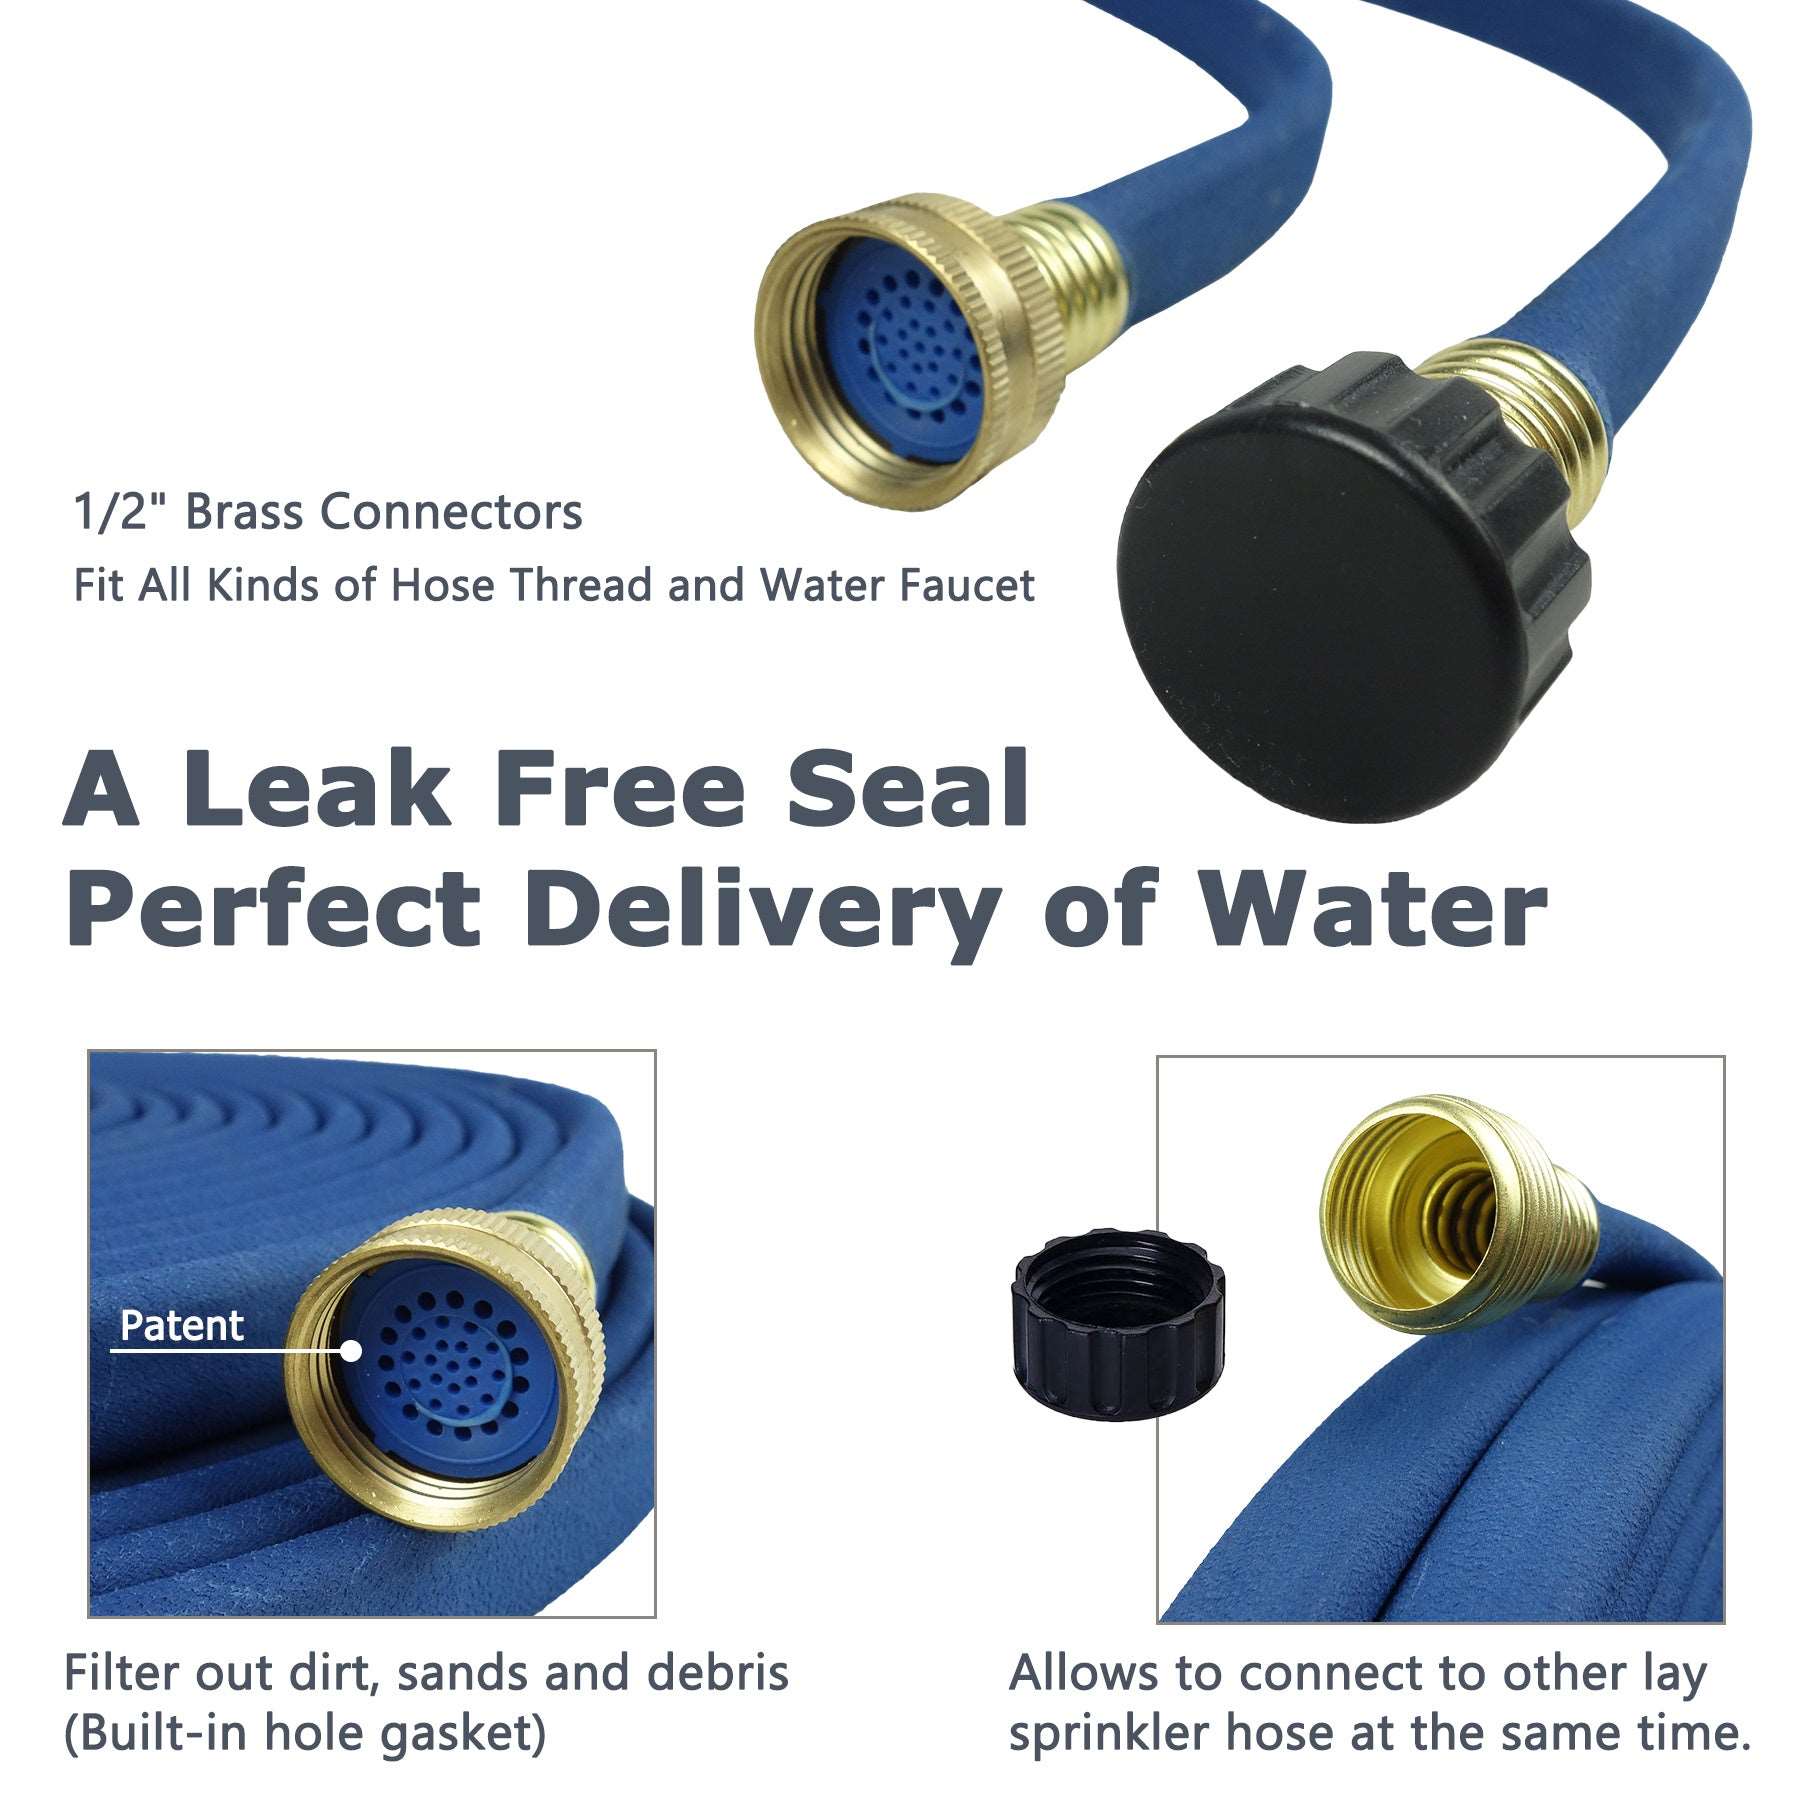 Soaker Hose with Leak Free Connector